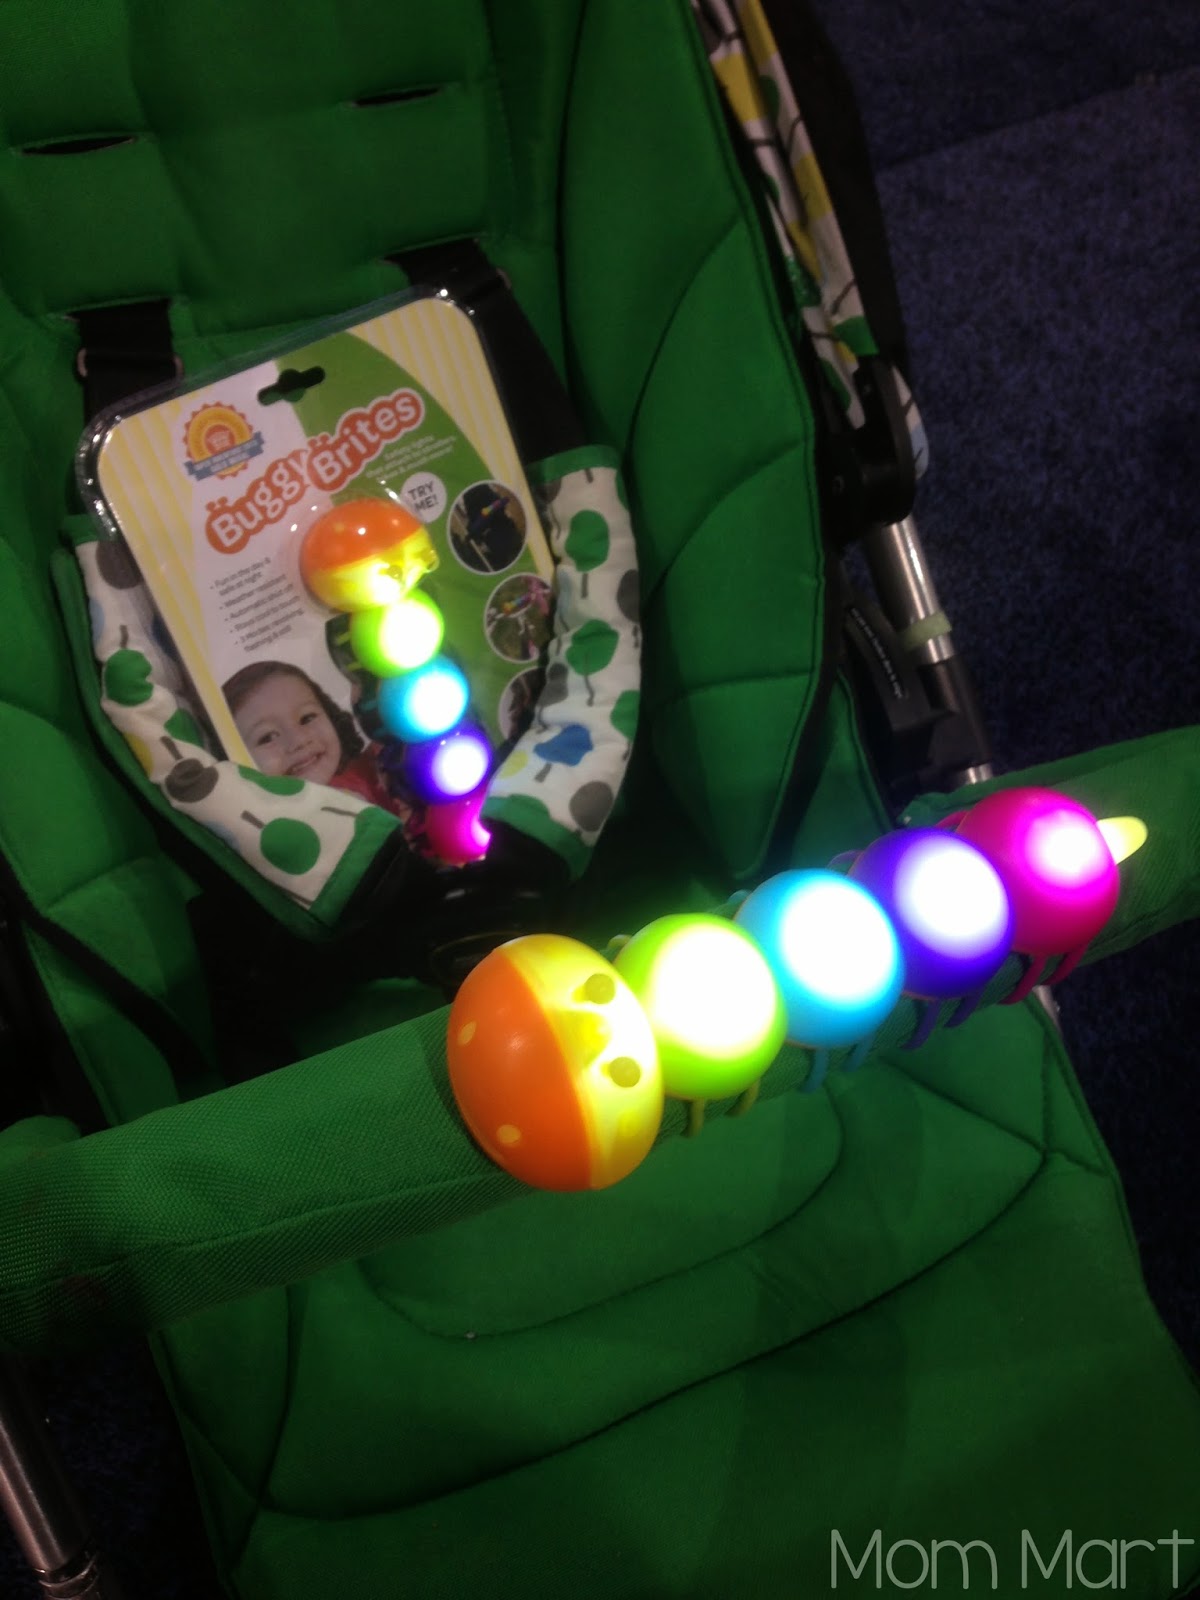 ABC Kids Expo 2014 The Toys of #ABCKids14 buggy brites